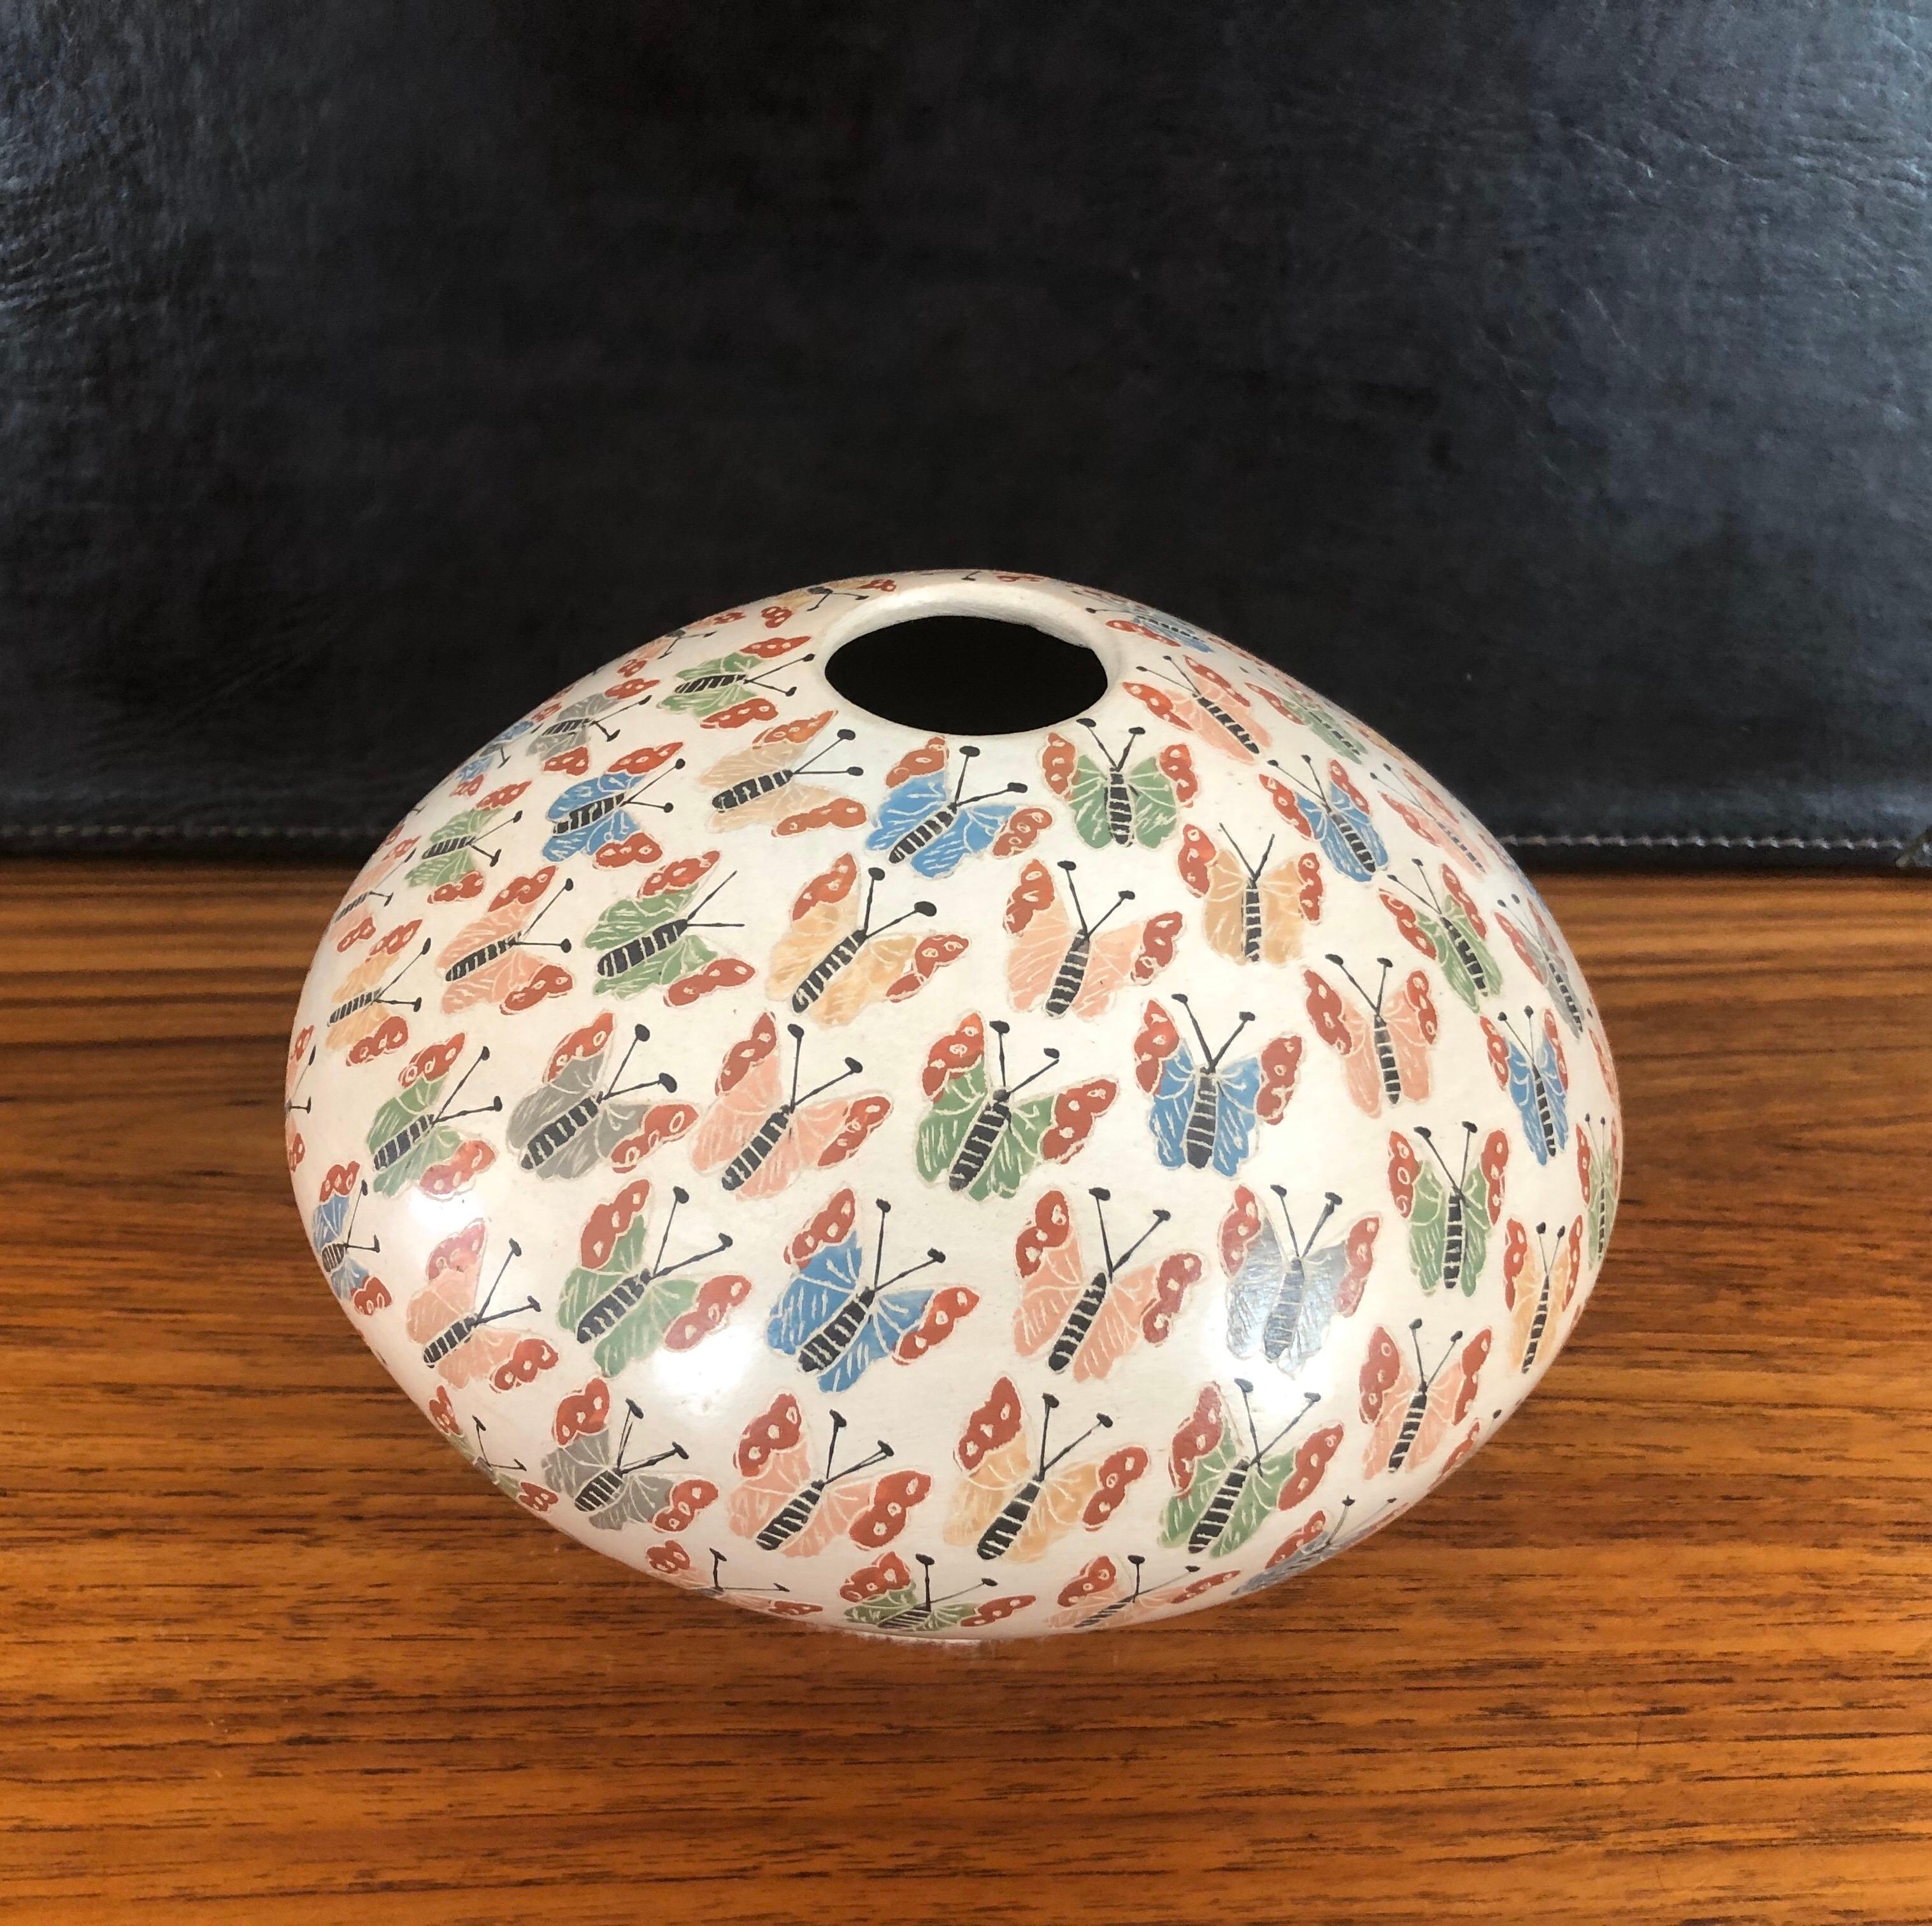 Beautiful hand-turned polychrome Mata Ortiz butterflies vase / seed jar by Celia Lopez, circa 1990s. The exquisite piece has wonderful design and color. 

Mata Ortiz or Casas Grandes pottery comes from the small village of Mata Ortiz located near